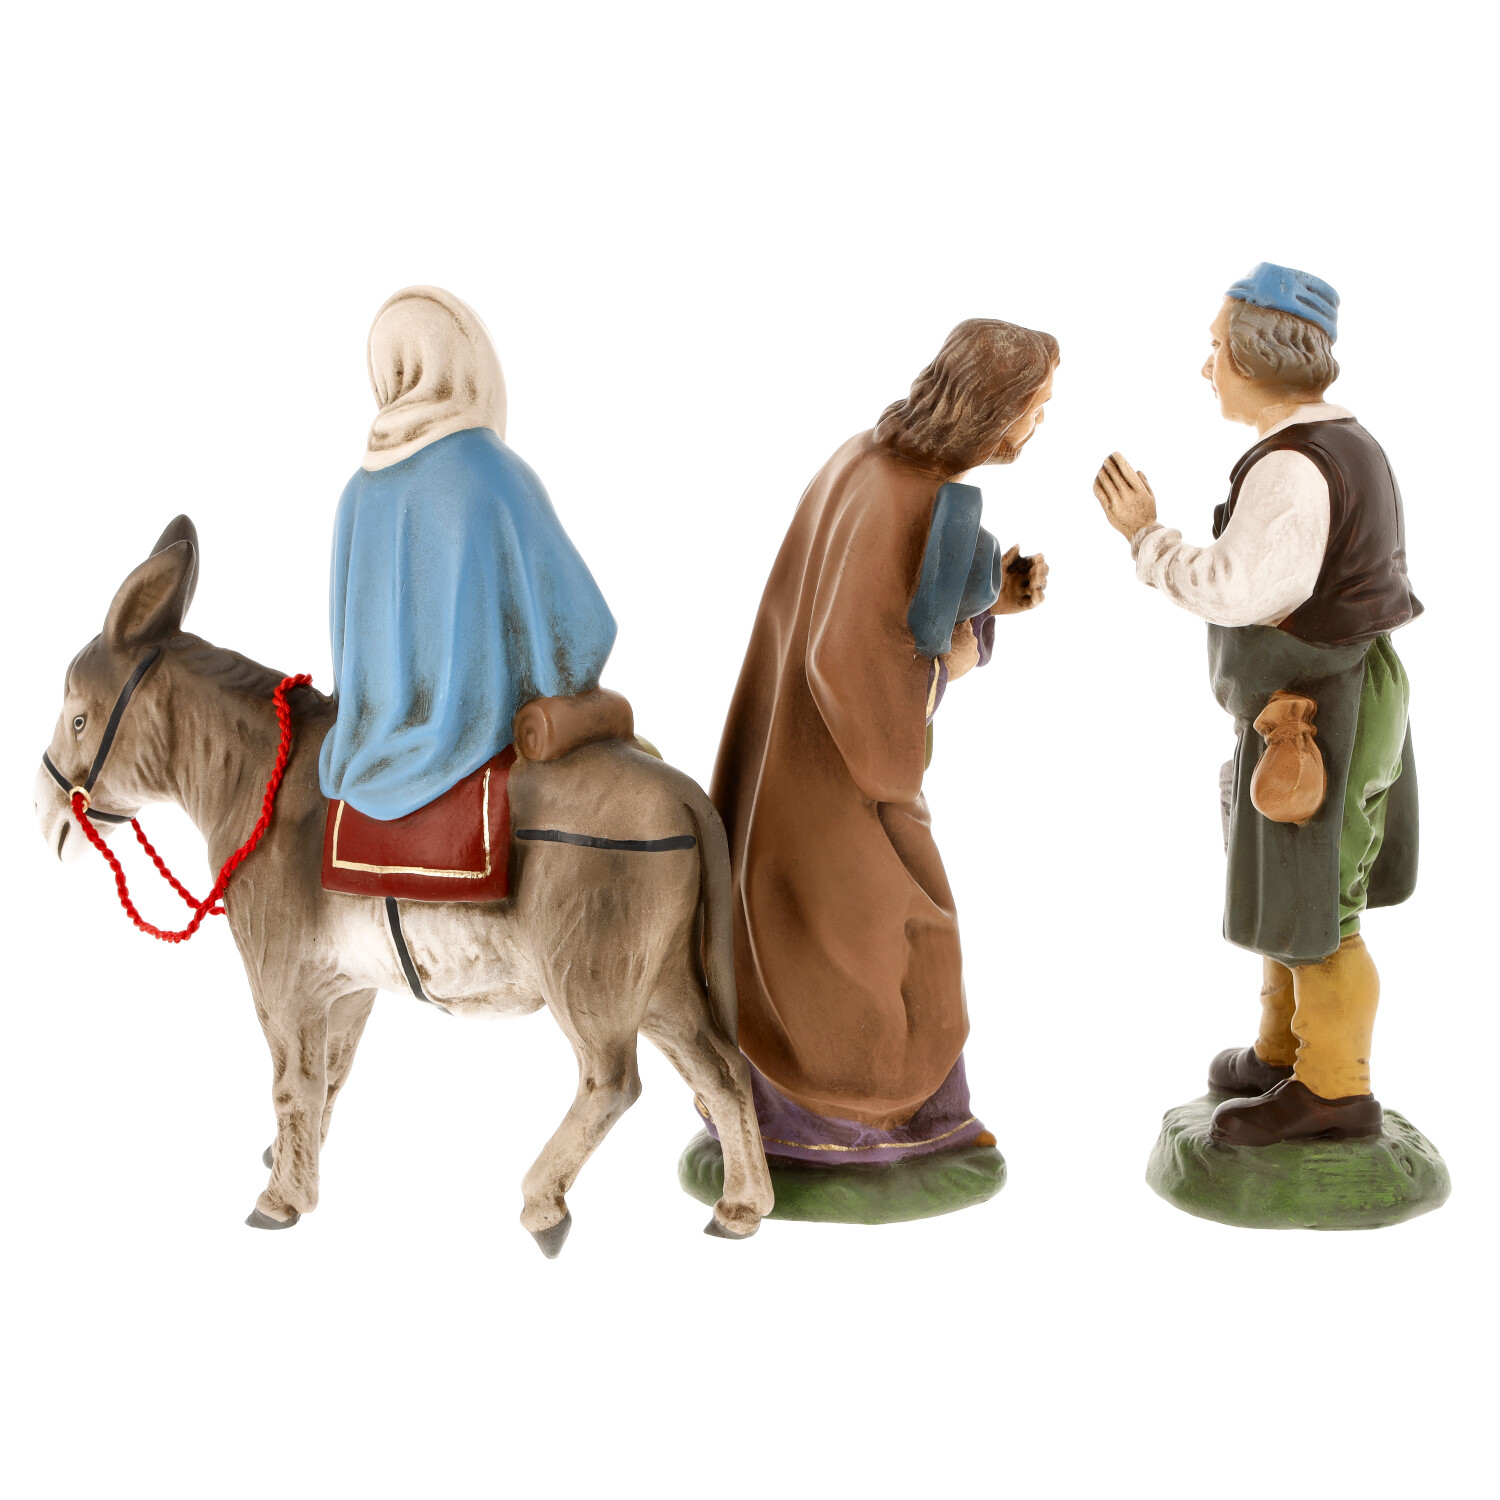 Search for lodging - Marolin Nativity figures - made in Germany